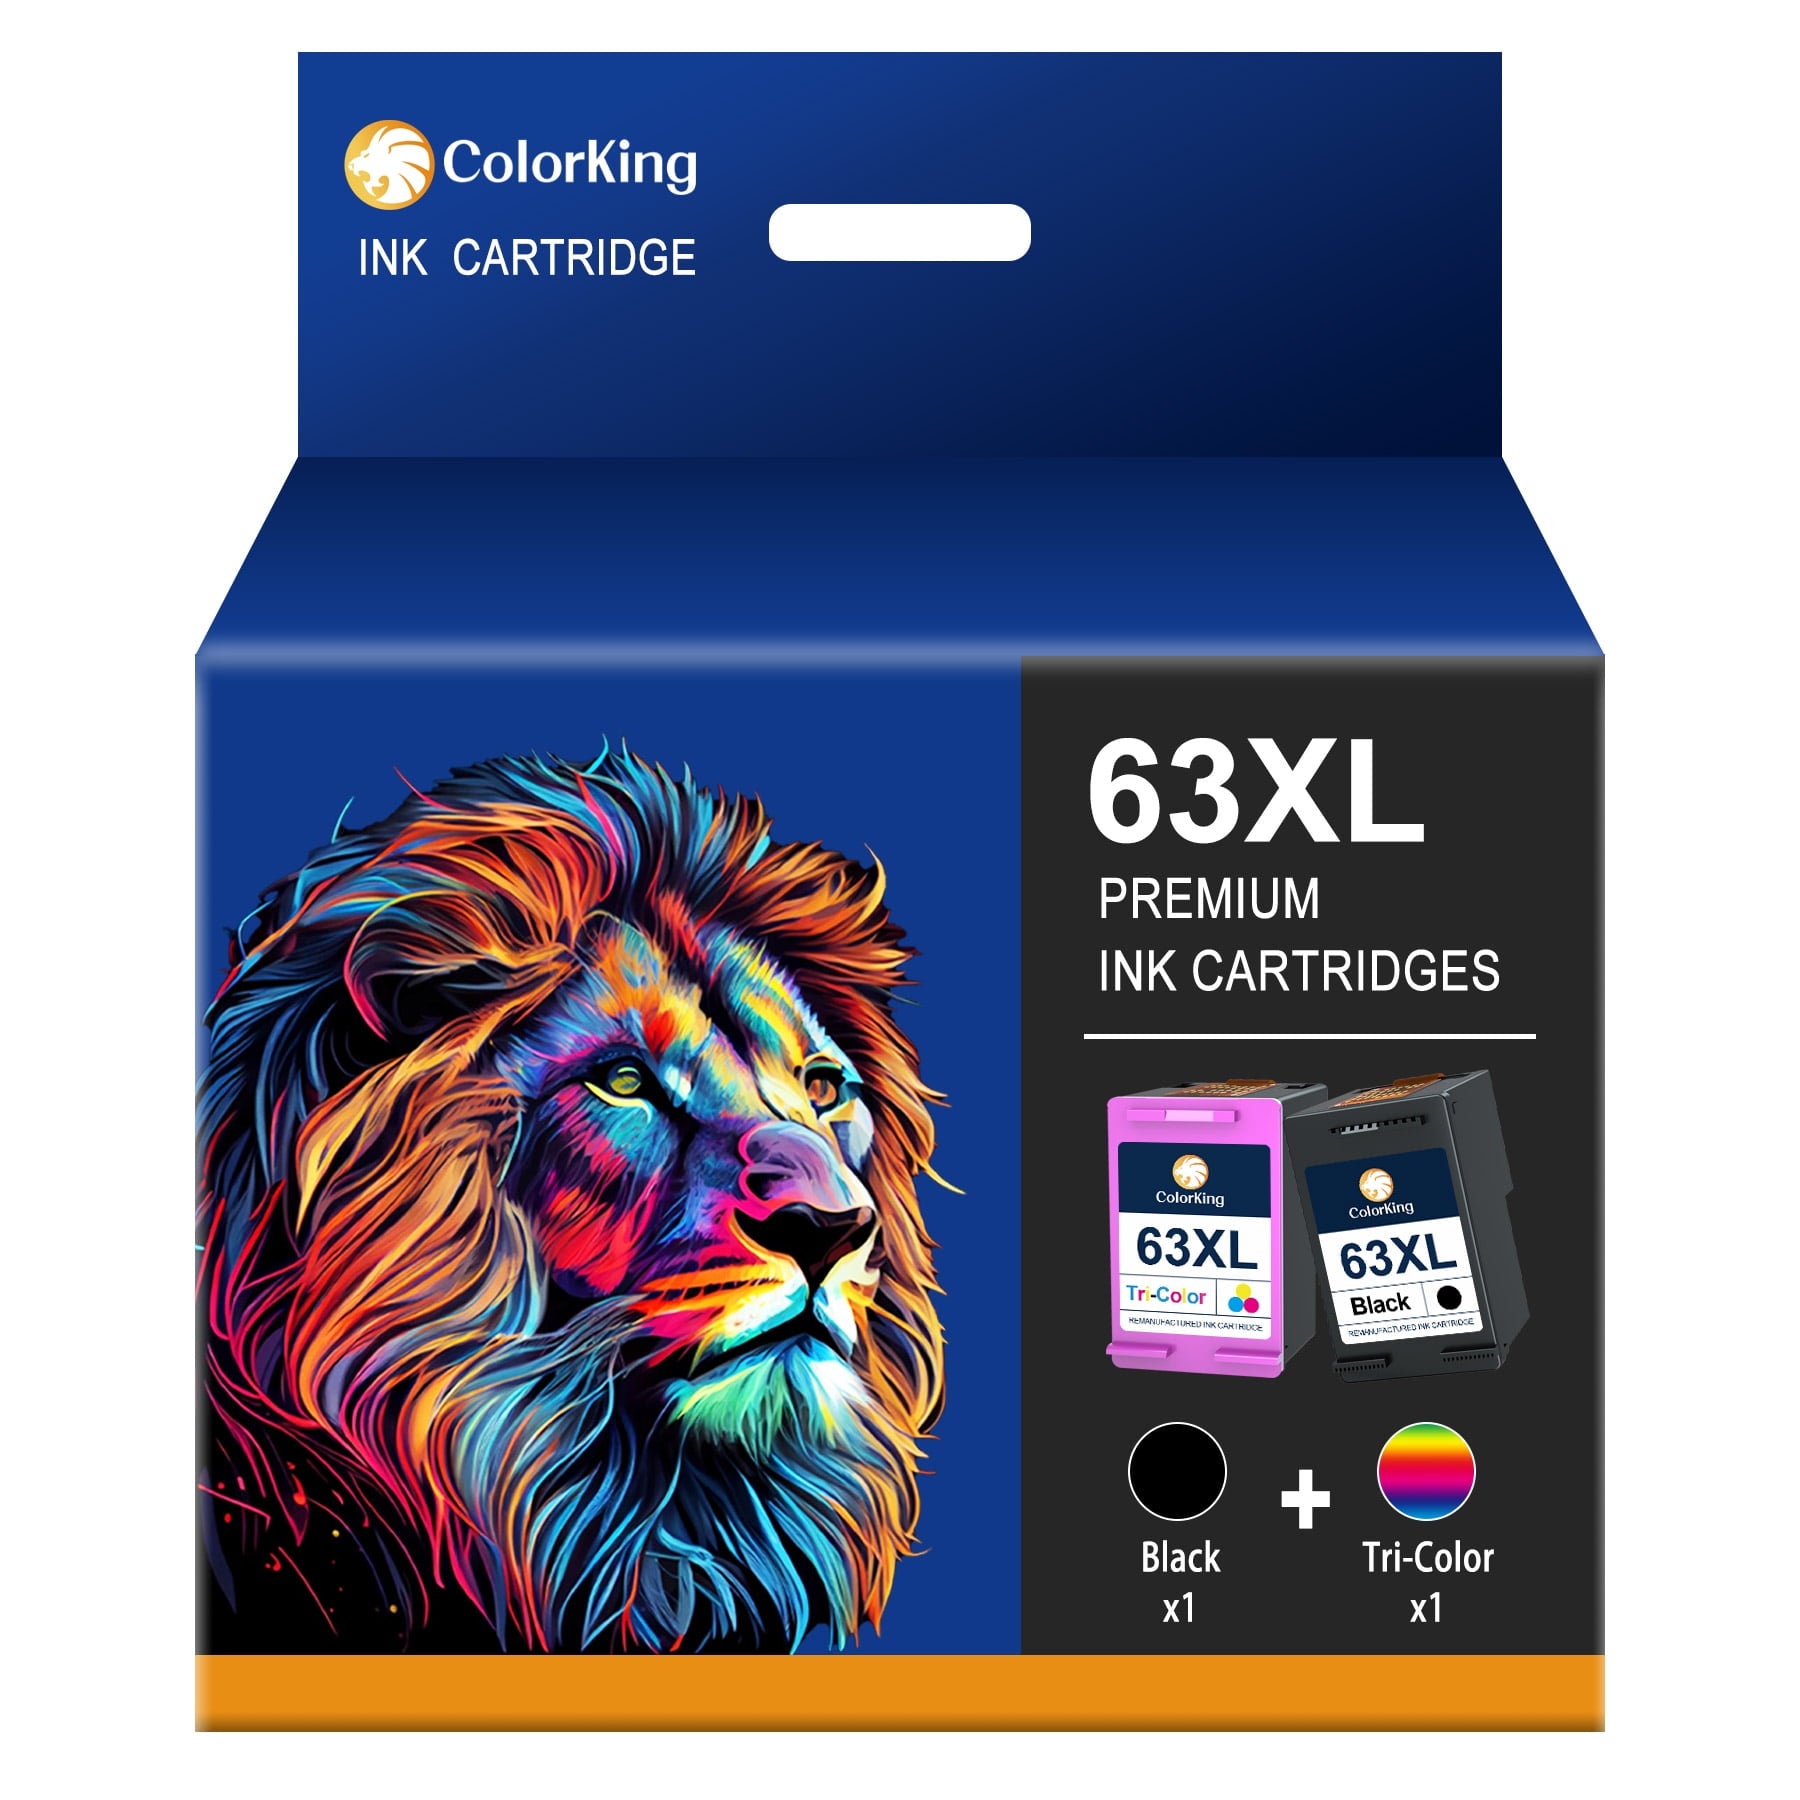 Colorking HP 63XL Ink Cartridges Replacement for HP Printer (Black and Tri-color, 2 Packs)